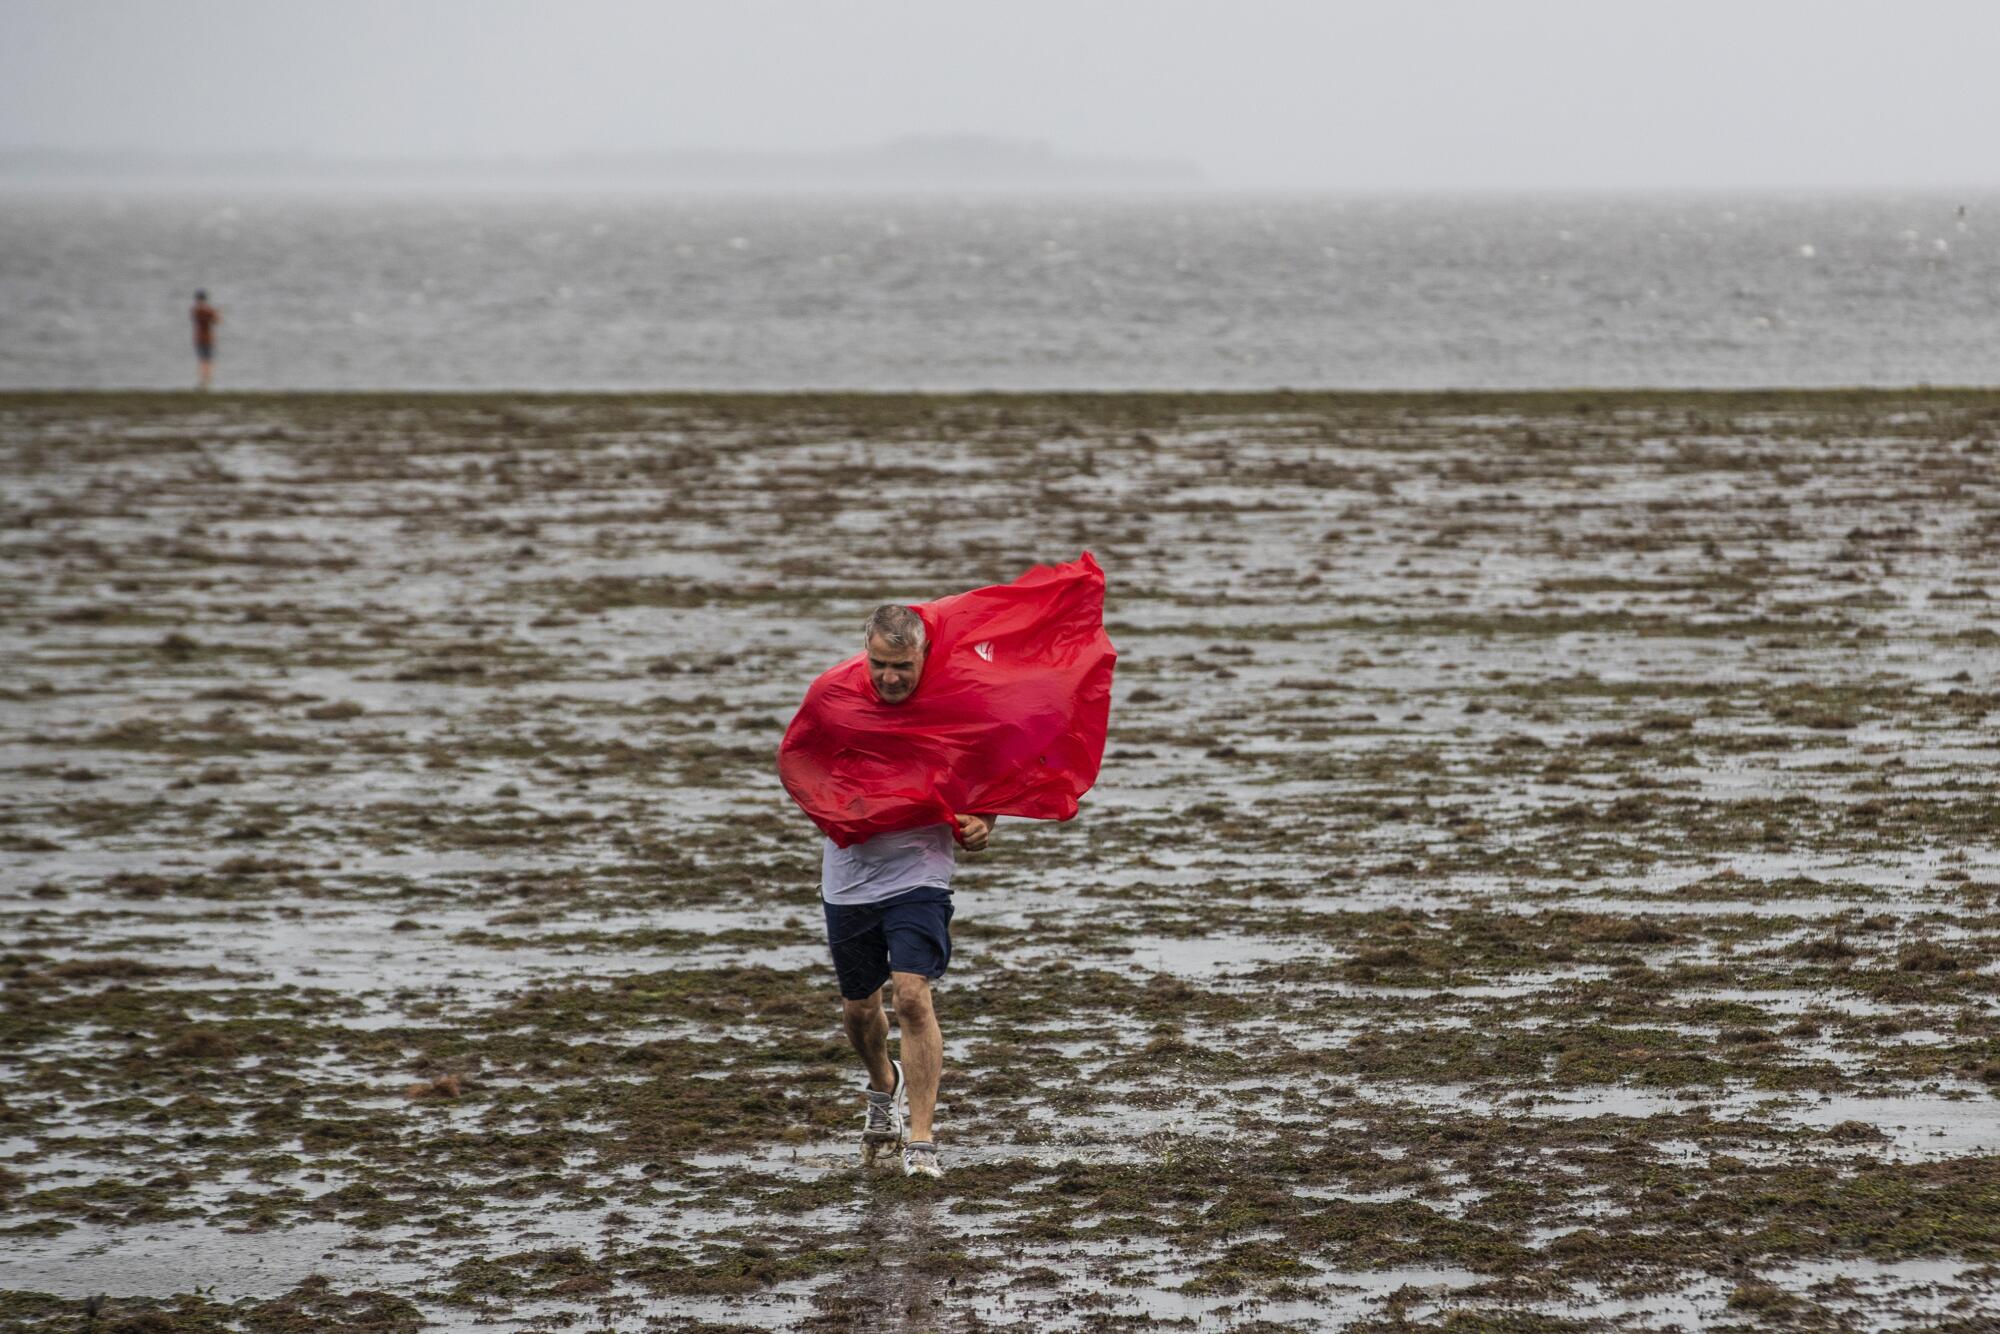 People walk in the receding waters of Tampa Bay due to the low tide from Hurricane Ian in Tampa, Fla. on Wednesday.